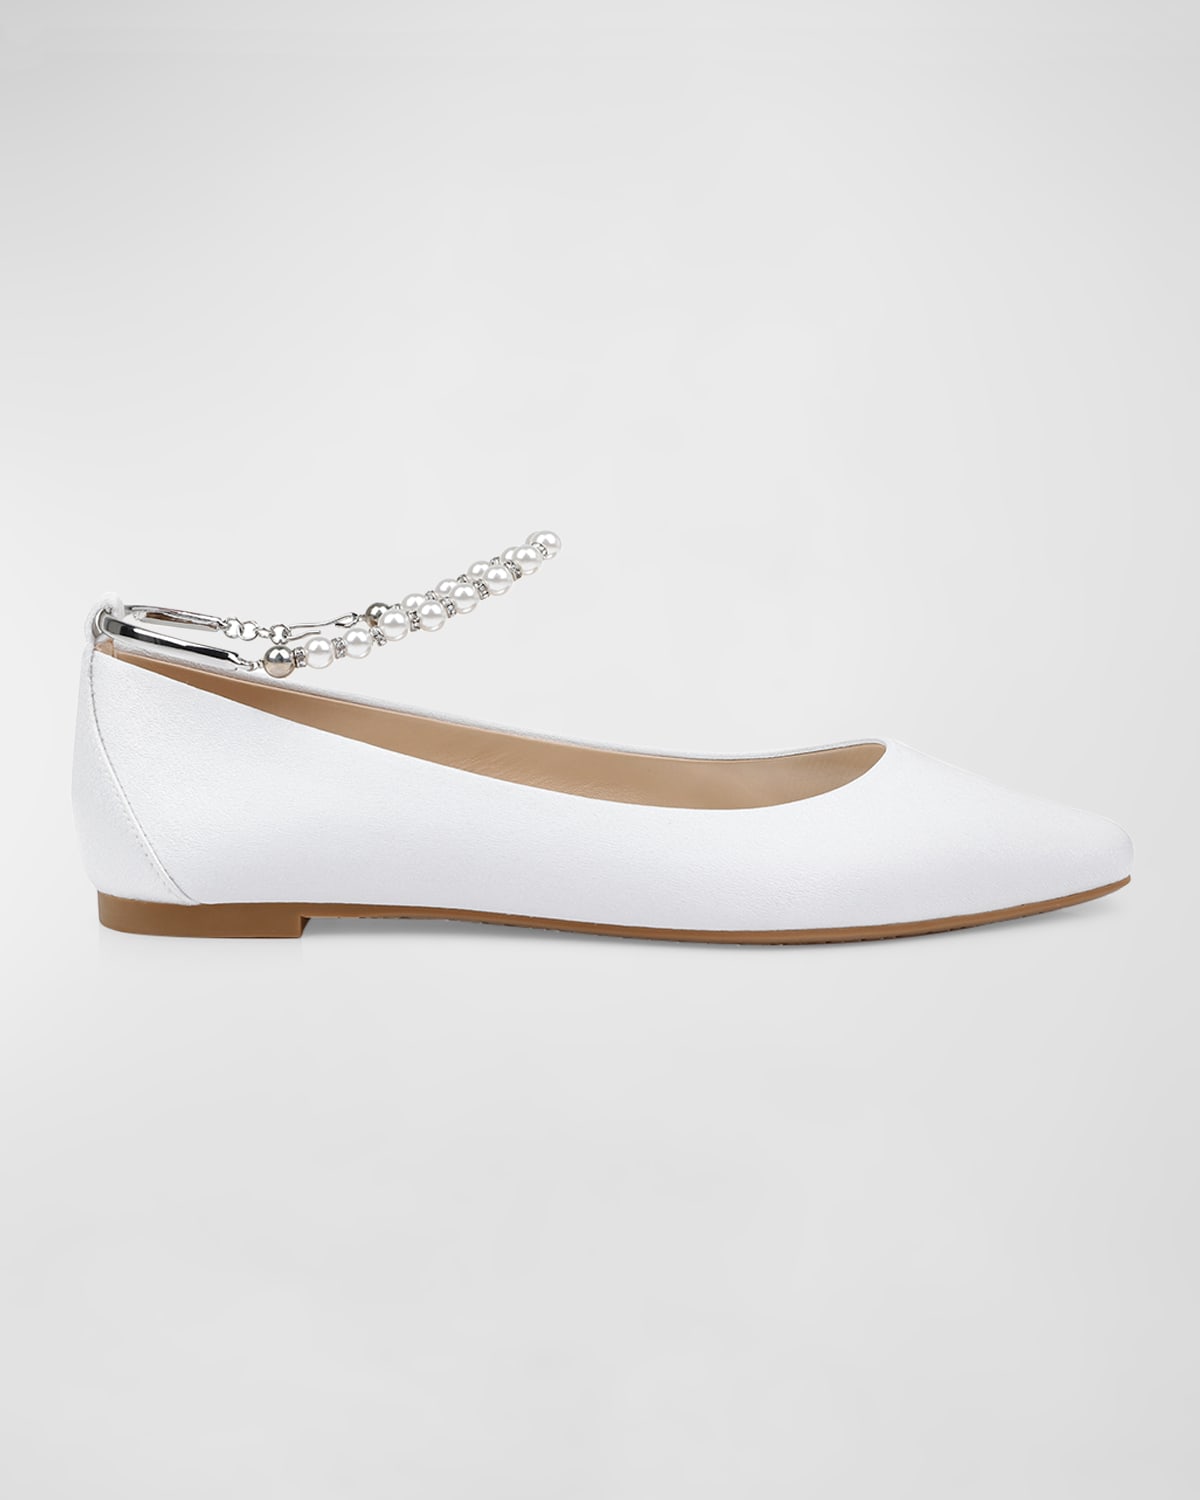 Badgley Mischka Women's London Ankle Chain Evening Ballet Flats In White Crepe